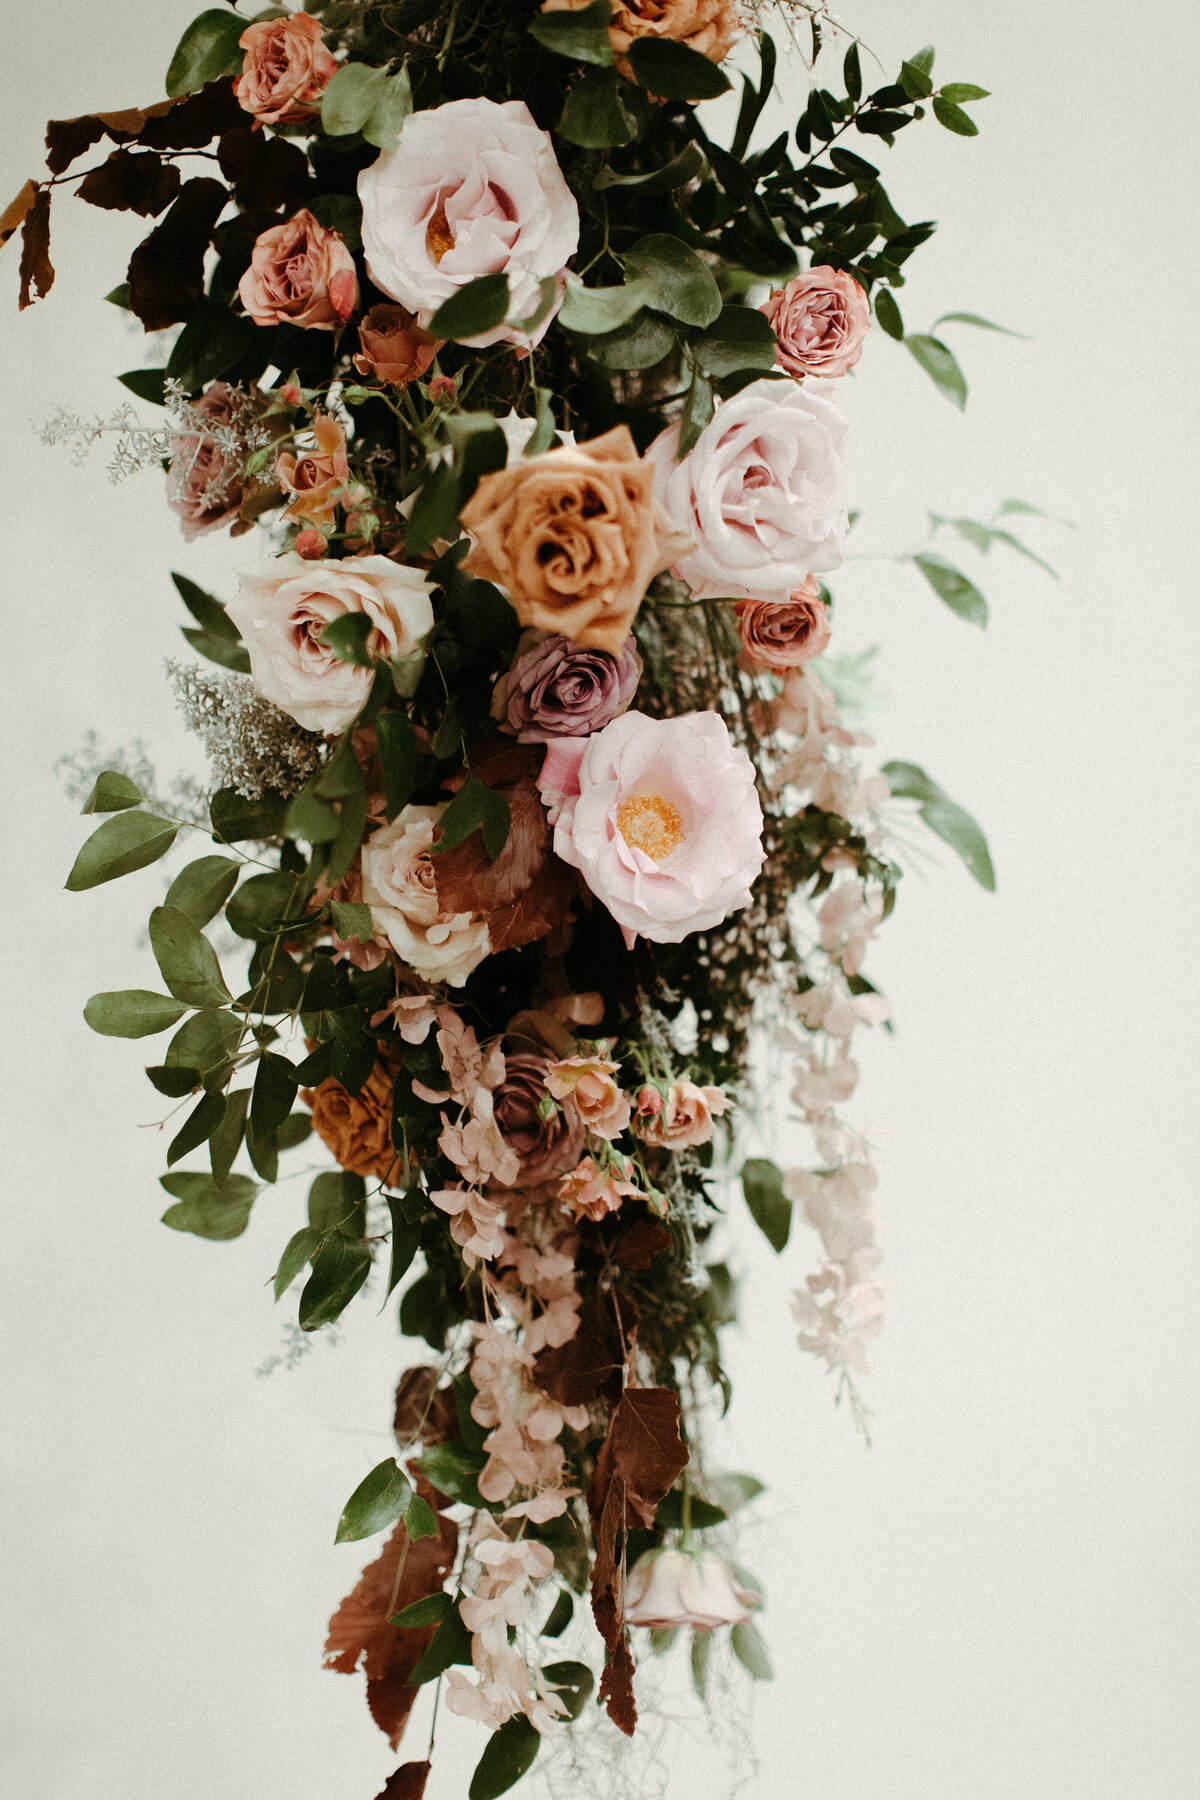 An eye-catching whimsical installation full of petal heavy roses and copper beech was the highlight of this art deco wedding. Terra cotta, burgundy, dusty pink, and other neutral florals warm up this ceremony. Designed by Rosemary and Finch in Nashville, TN.